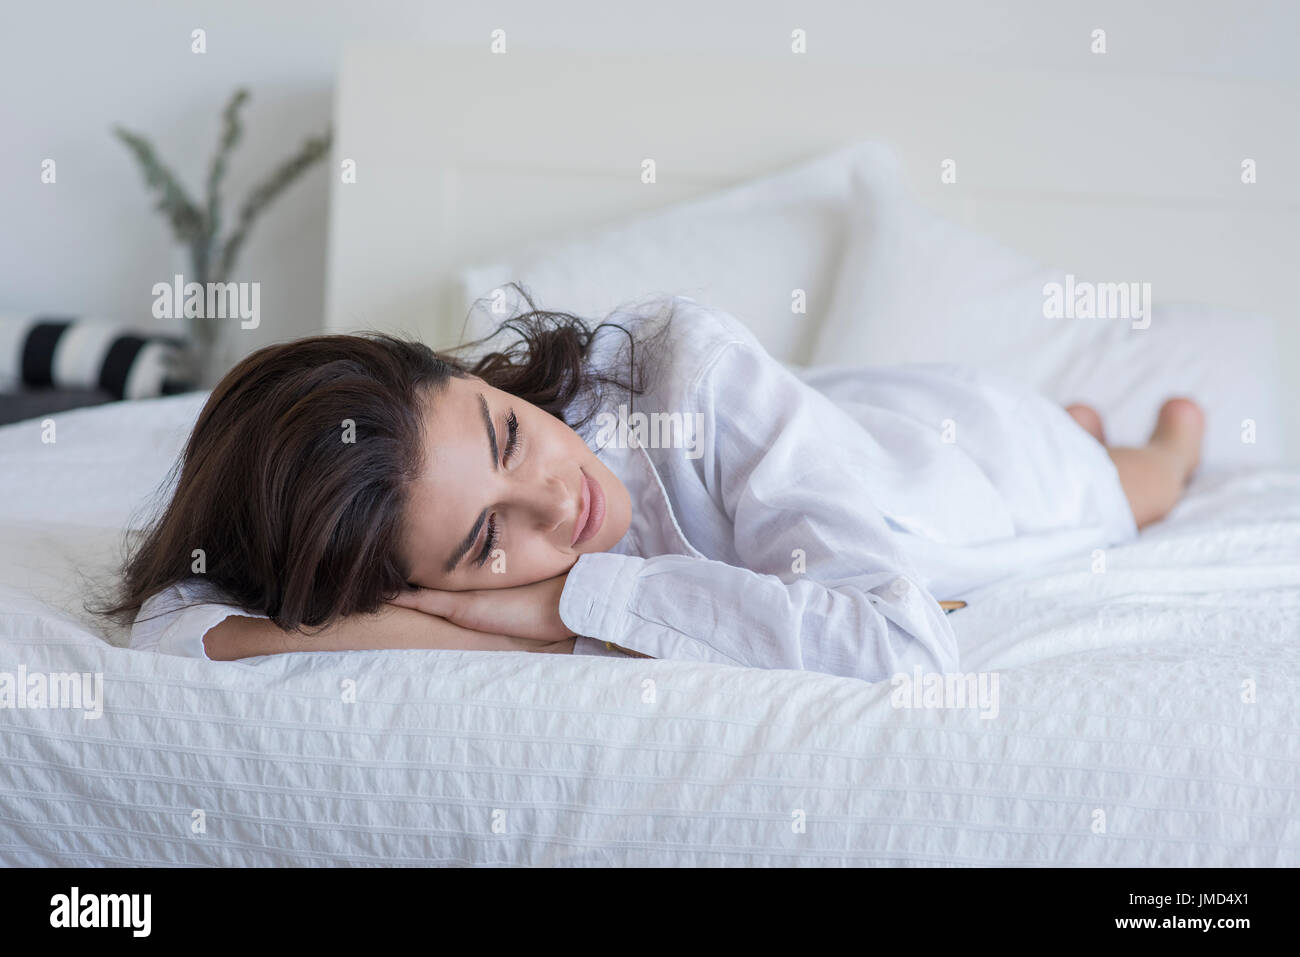 Young woman lying on bed wearing a white shirt. Stock Photo